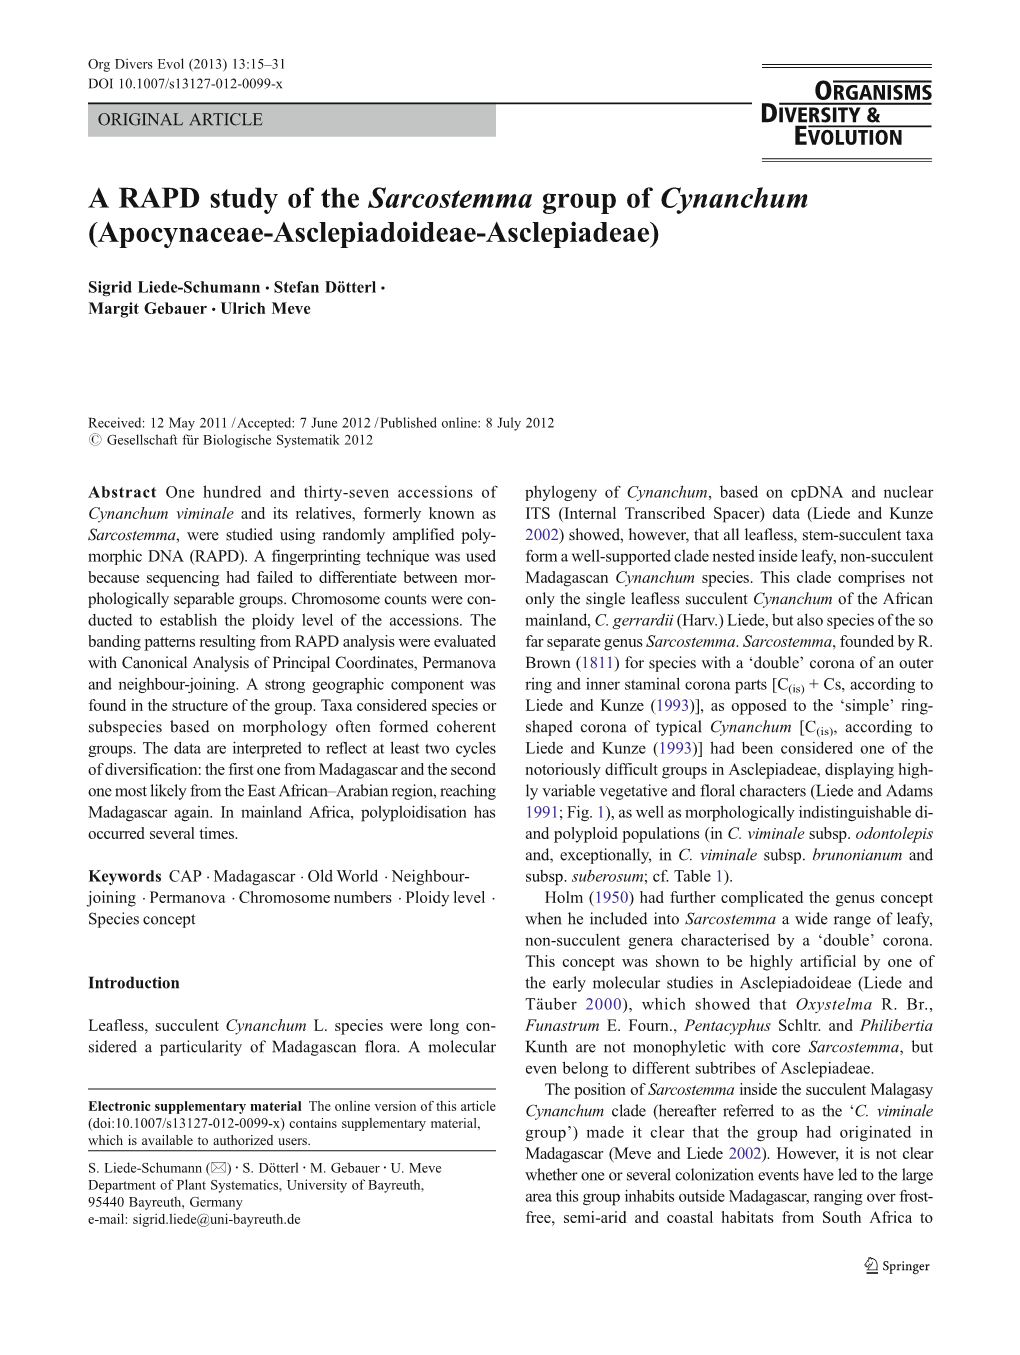 A RAPD Study of the Sarcostemma Group of Cynanchum (Apocynaceae-Asclepiadoideae-Asclepiadeae)